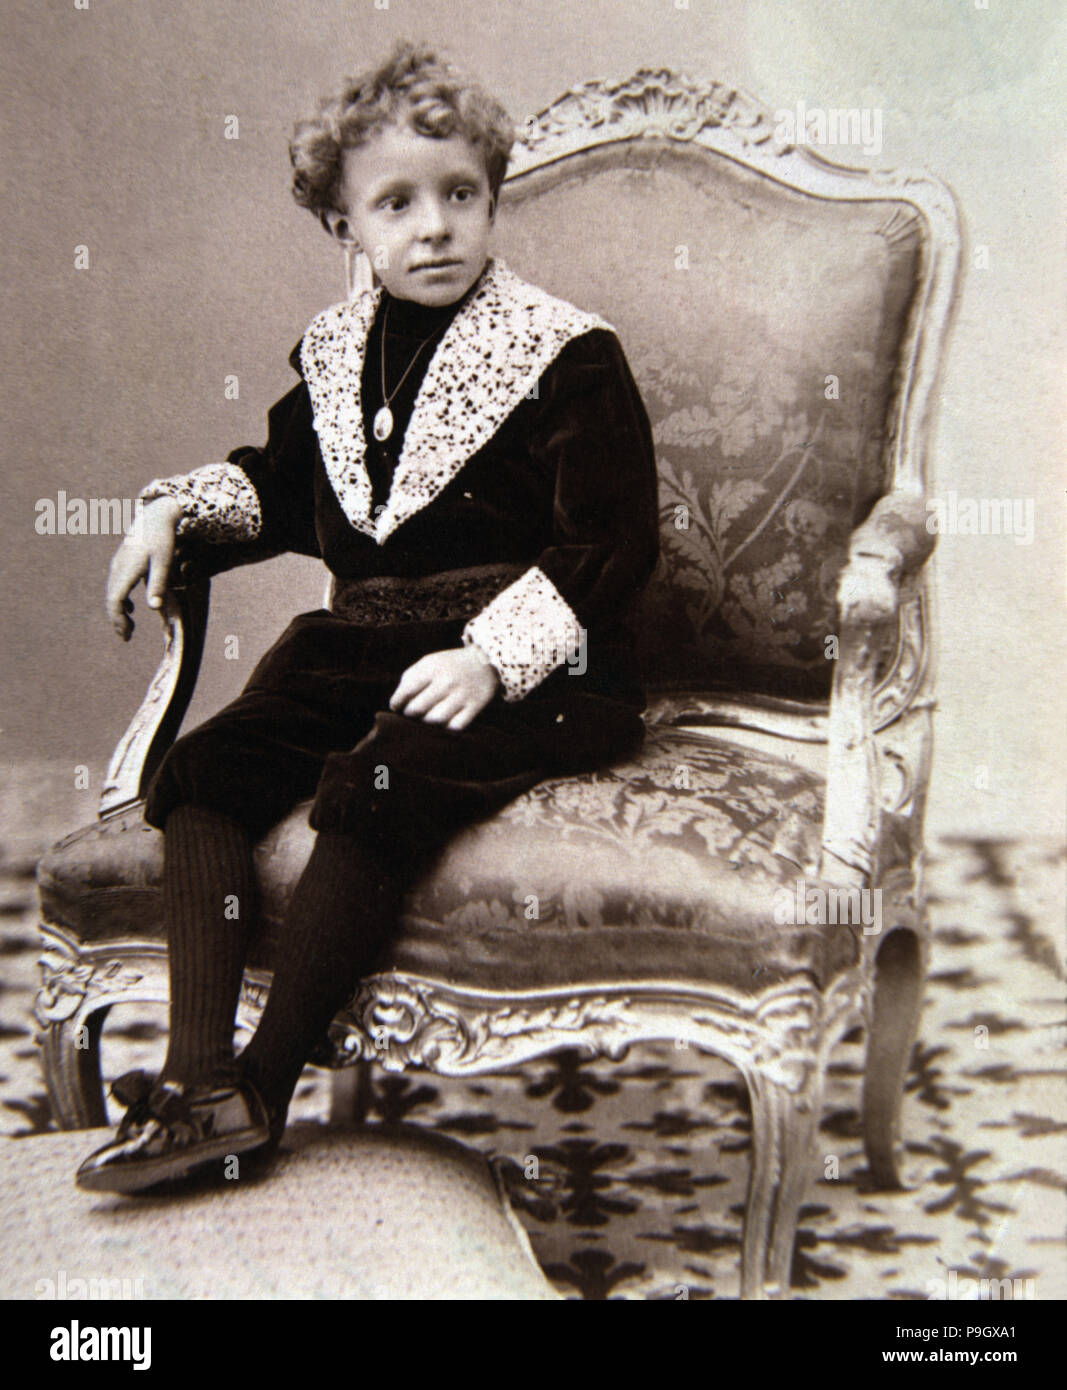 Alfonso XIII, King of Spain. (1886-1941) photo of the king when was a child under the regency of … Stock Photo